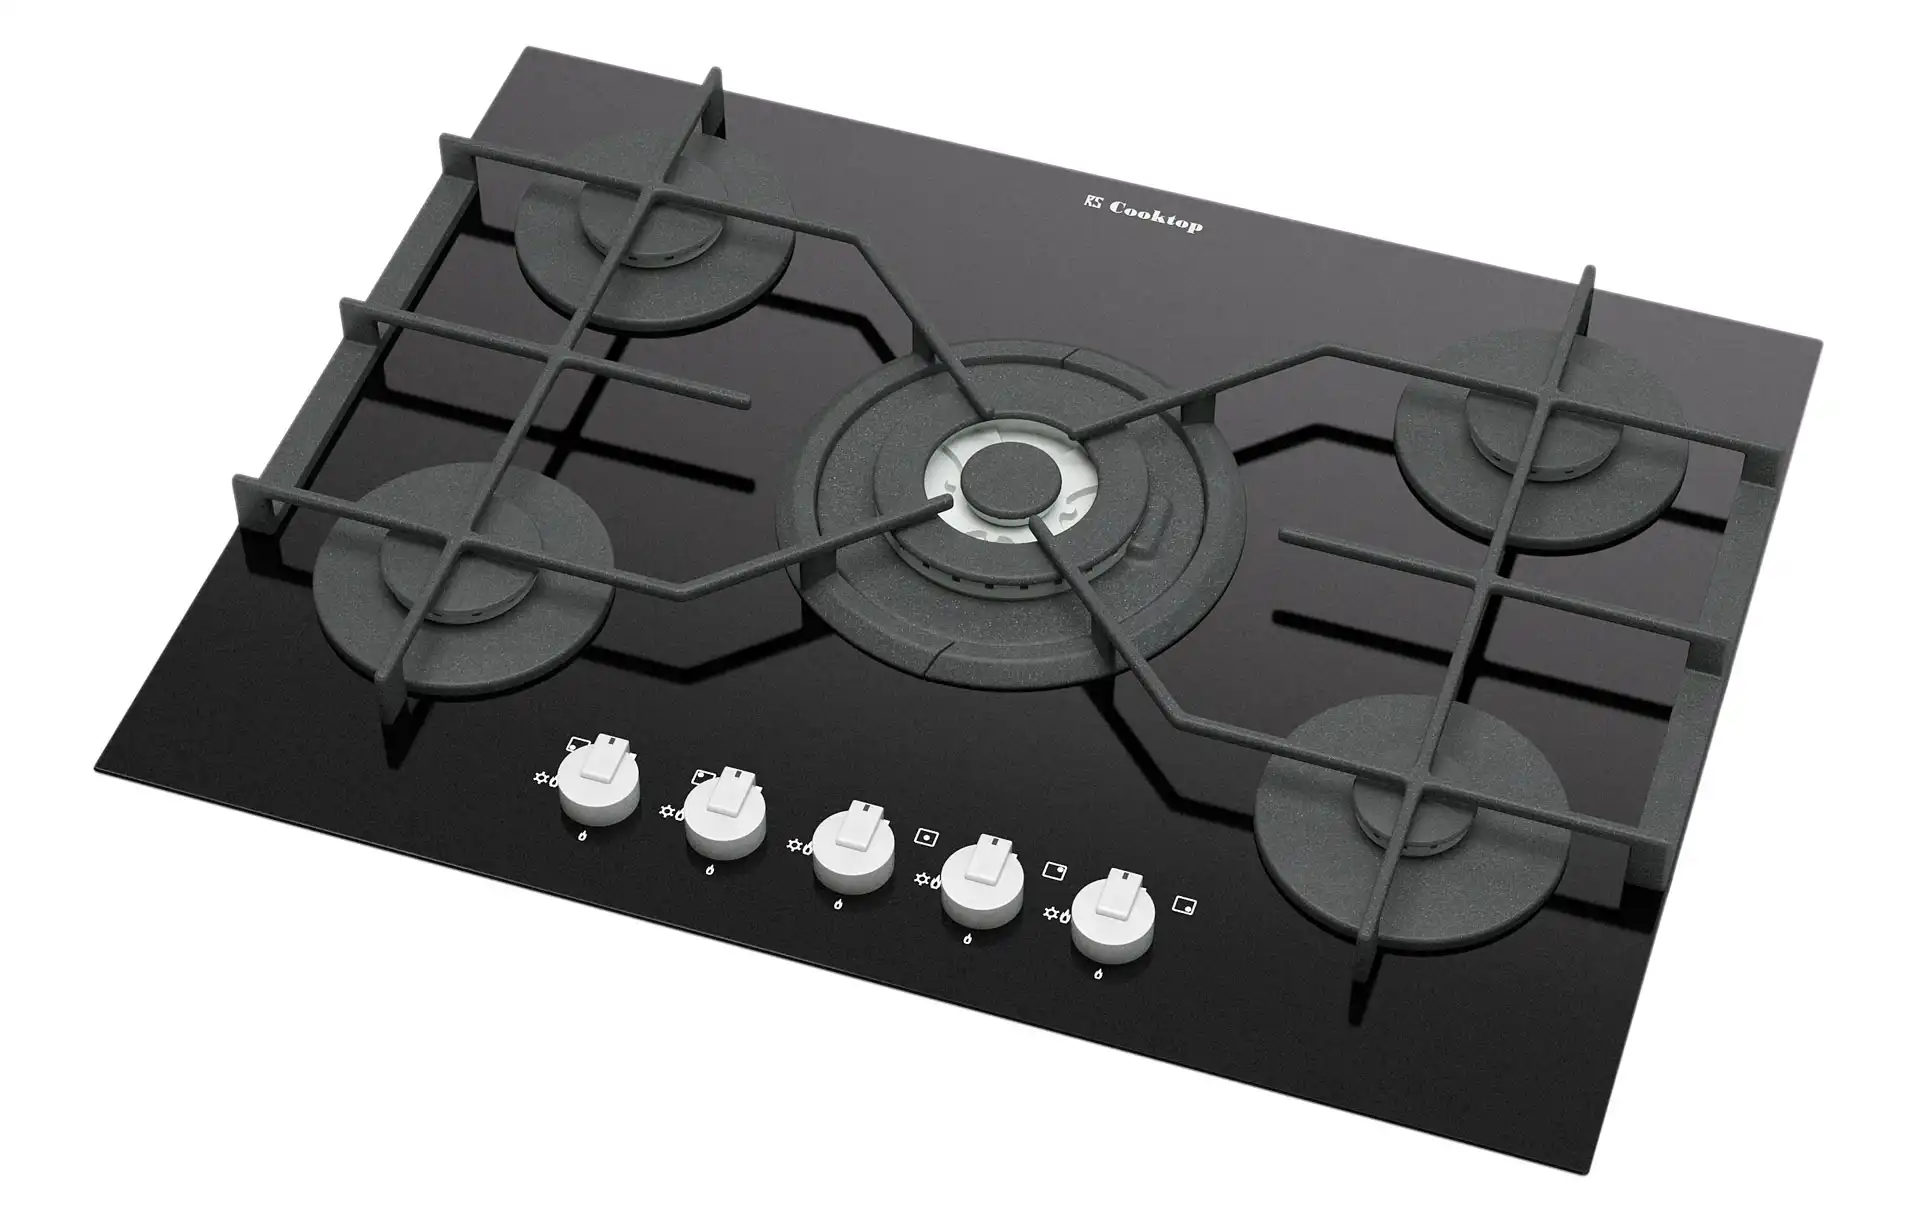 Photorealistic rendering of a 3d model of a black hob with a large gas burner in a white studio. Perspective view.